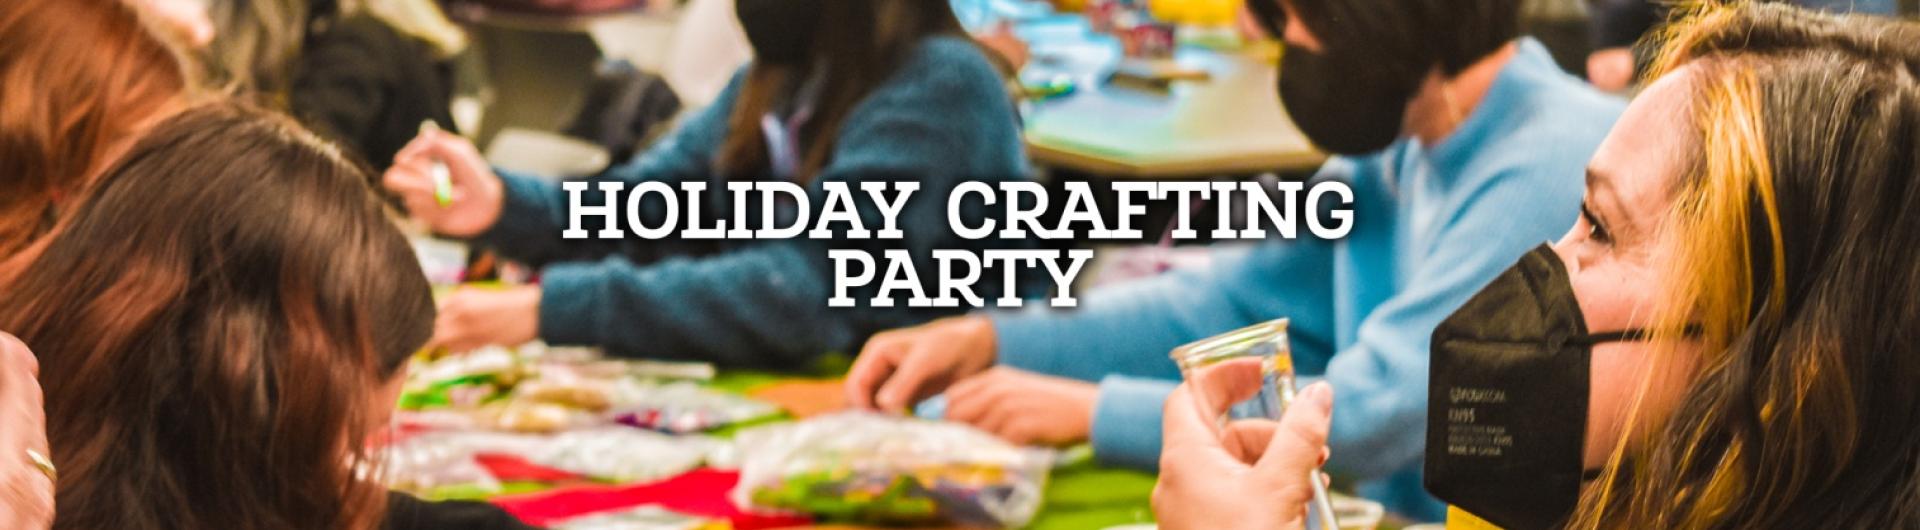 Holiday Crafting Party Banner